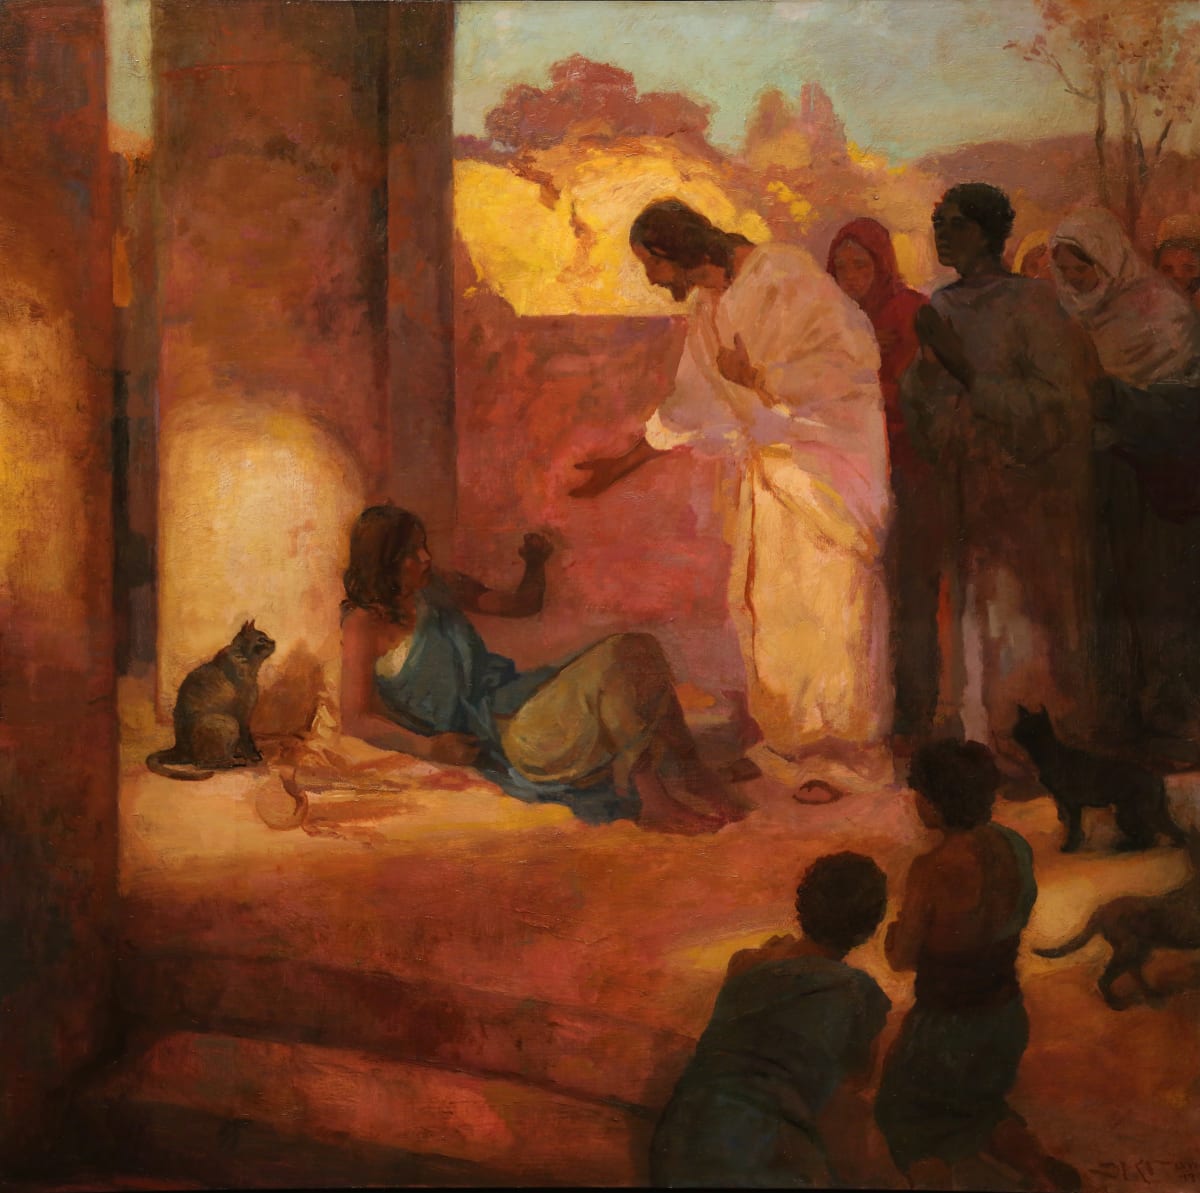 Ye Took Me In by J. Kirk Richards  Image: The Savior lifts a woman from the ground. 
Matthew 25:35-46 